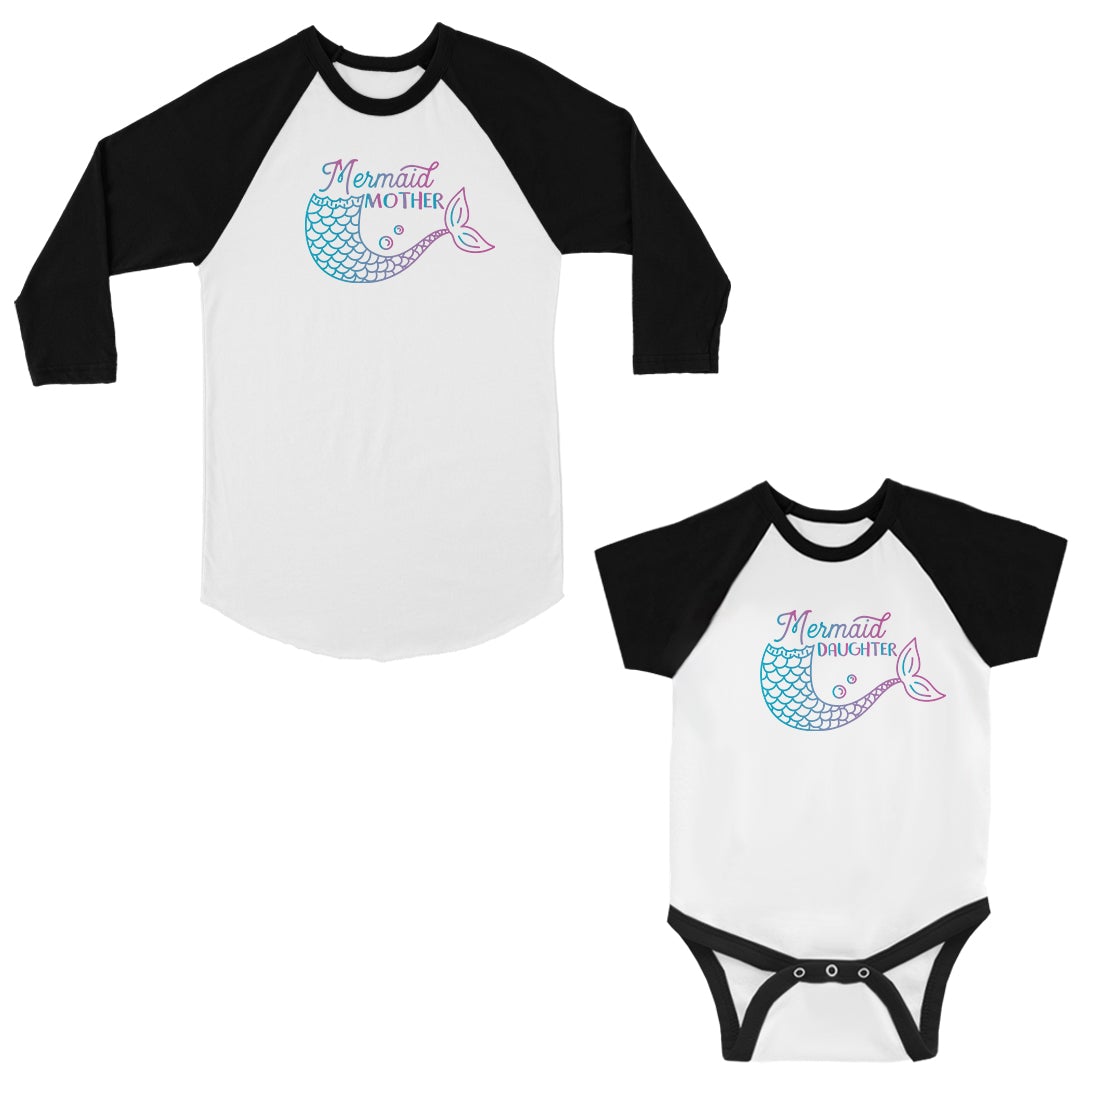 Mermaid Mother Daughter Mom and Baby Matching Baseball Shirts Gift Black and White